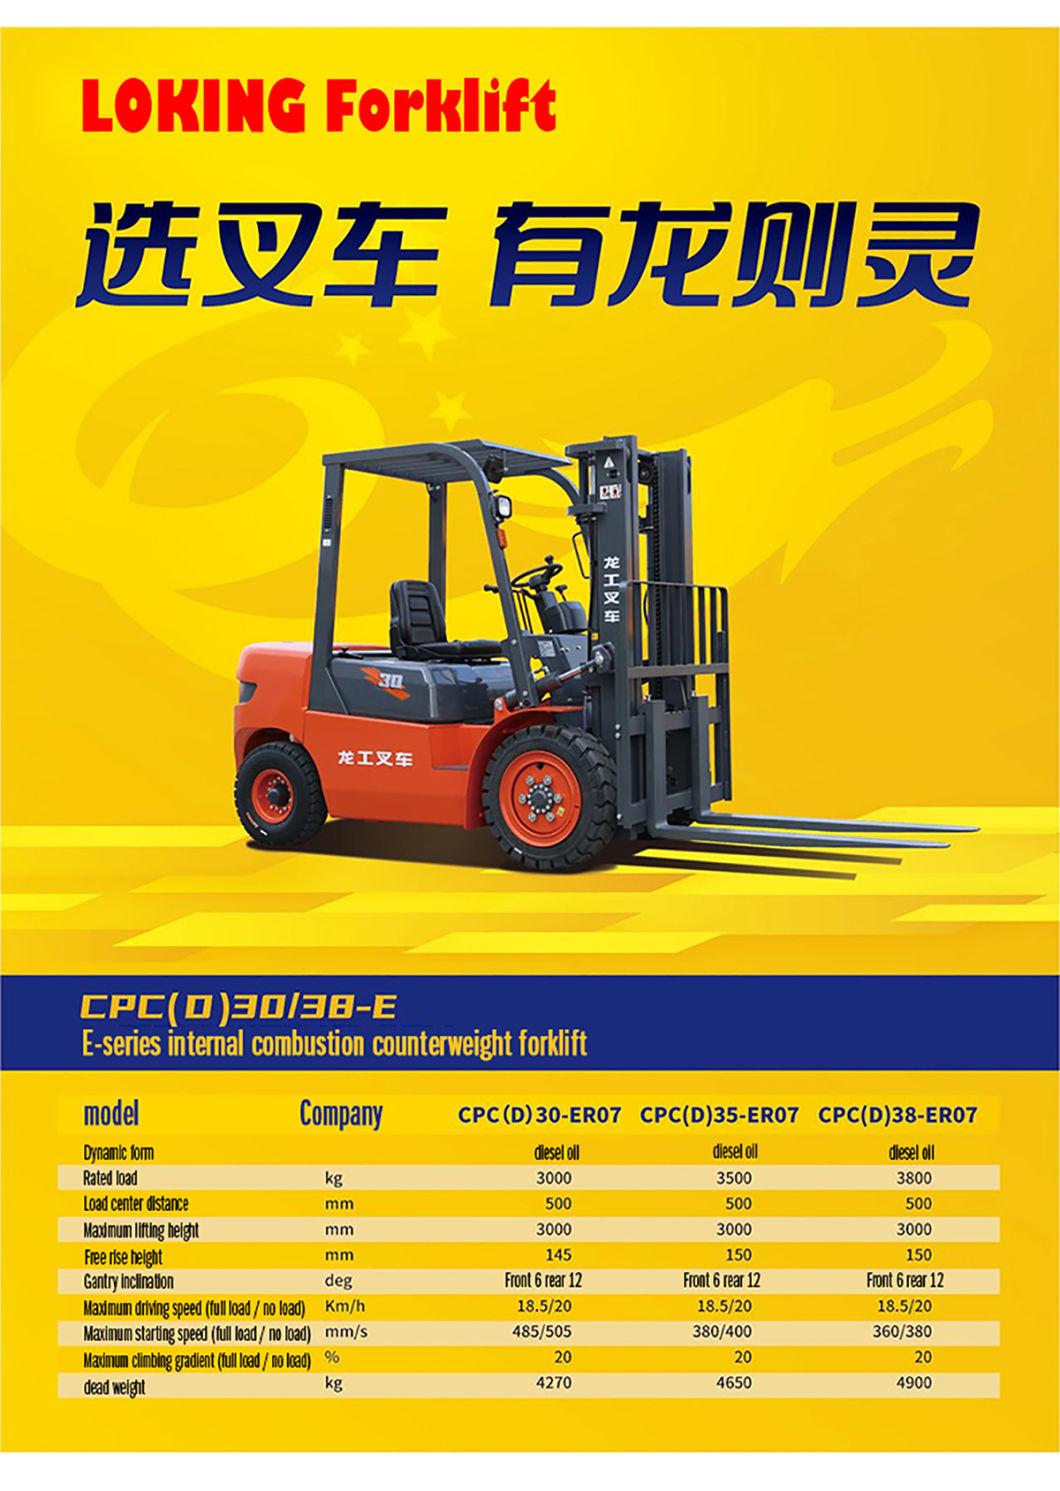 Full Free Lifting Brand New 3-3.8 Ton Diesel Forklift with Diesel Engine Forklift